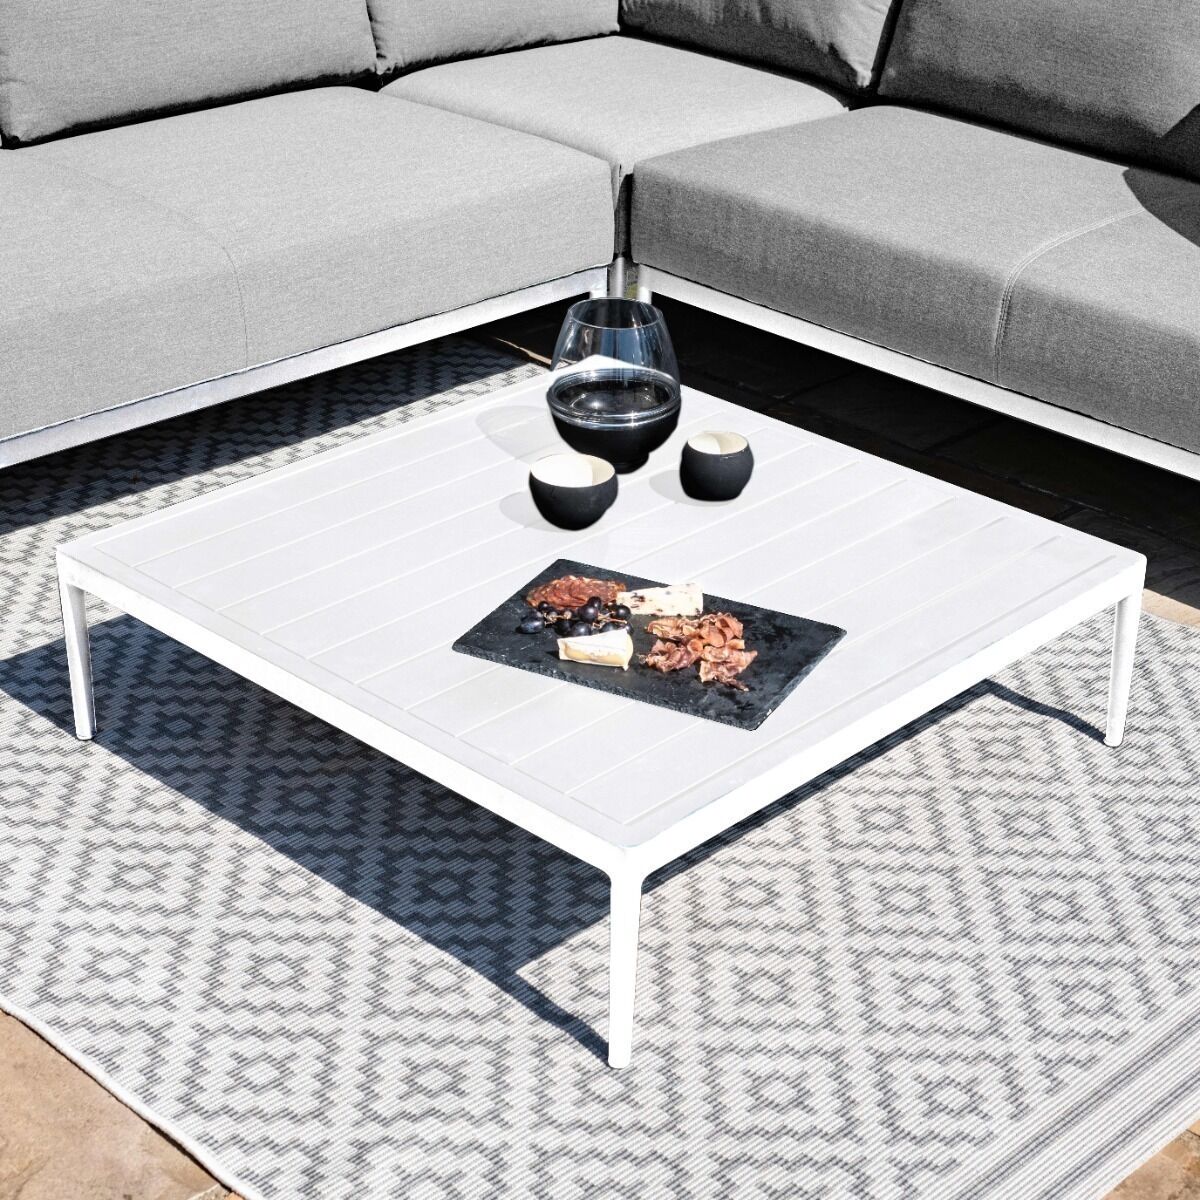 Maze - Outdoor Fabric Eve Corner Group - Lead Chine product image